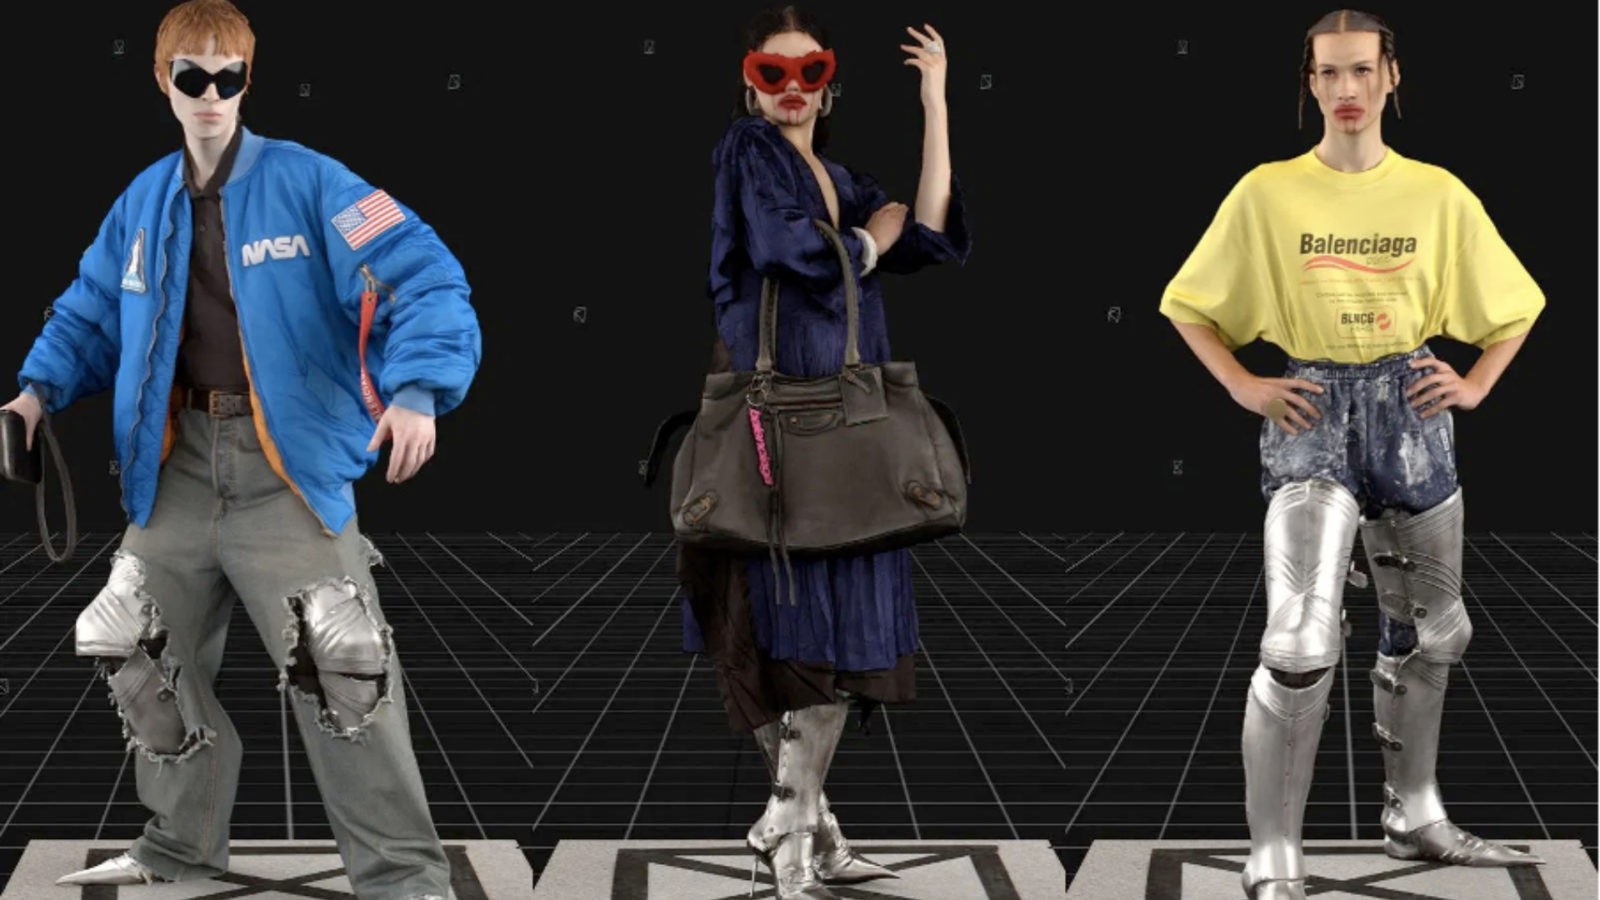 Balenciaga NFTs and Louis Vuitton's Wechat moments: How luxury